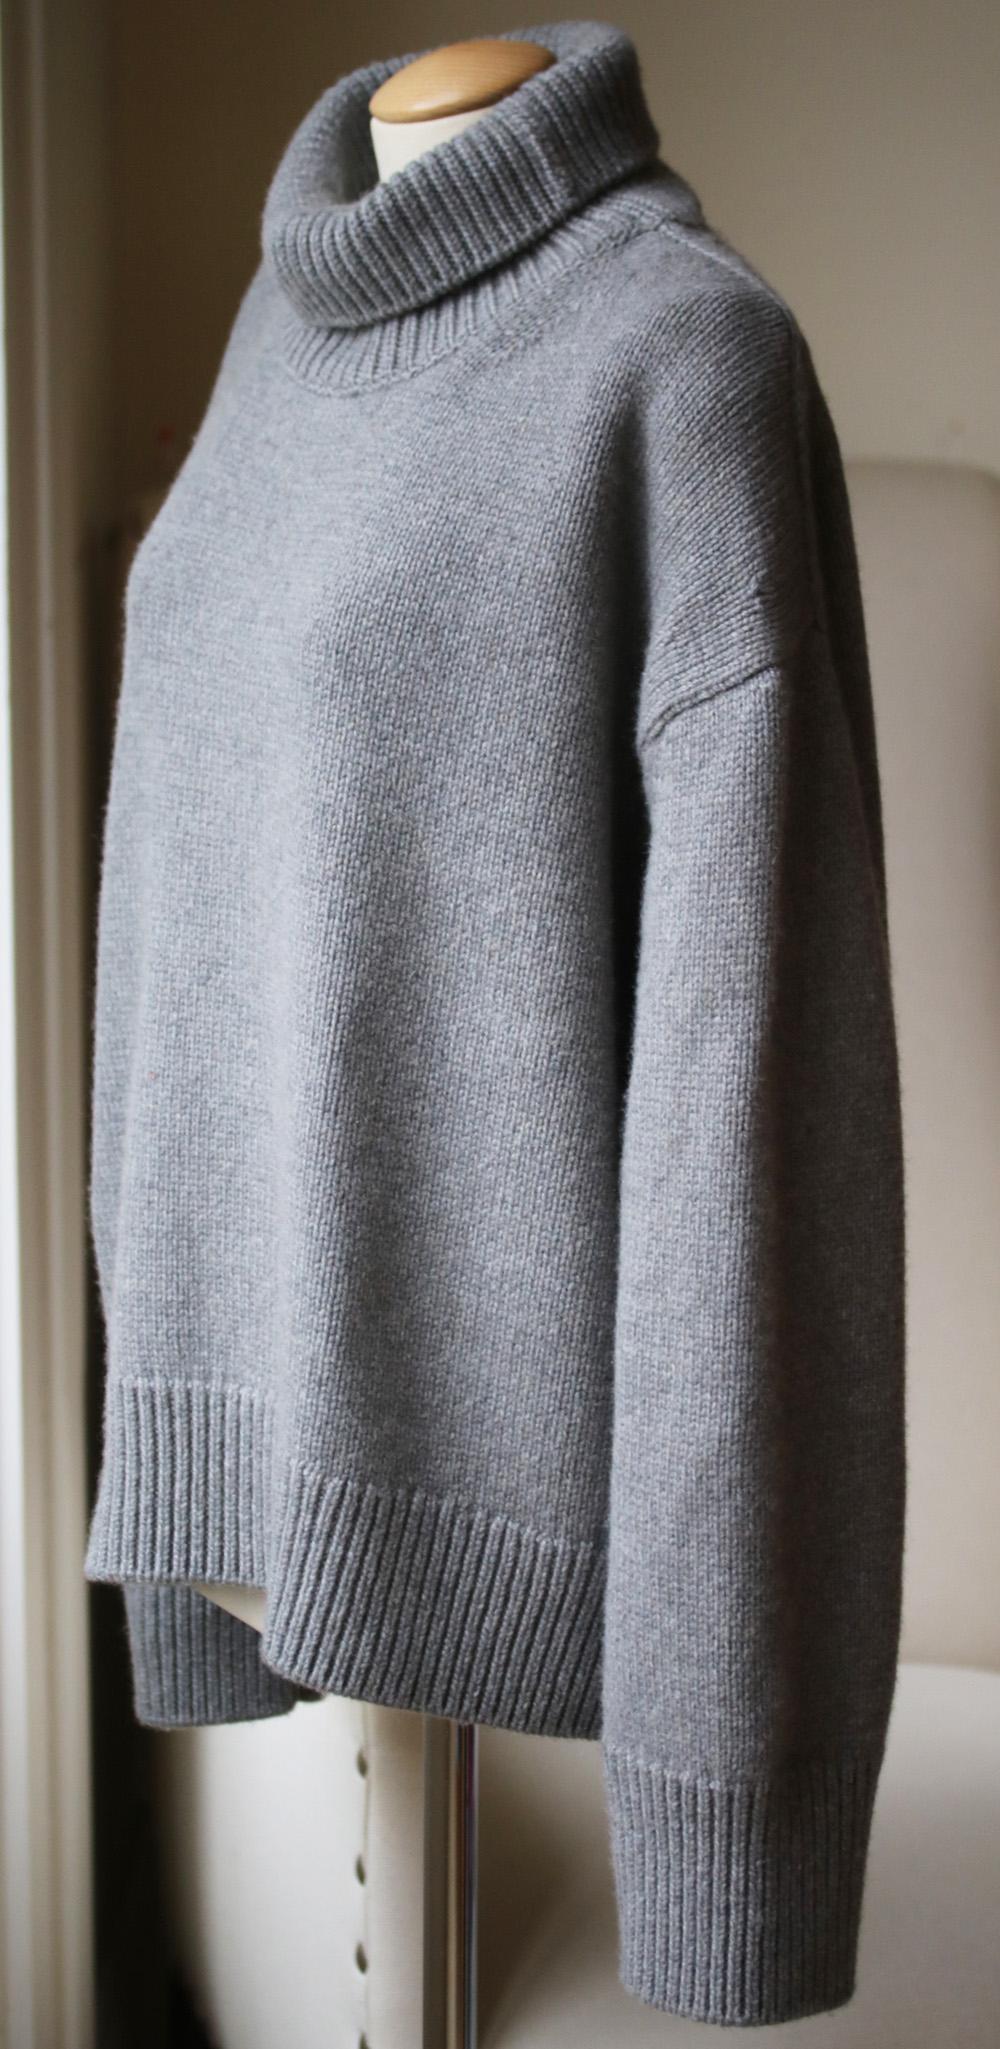 Knitted from a soft cashmere of Italian-sourced cashmere, this turtleneck sweater by Céline under Phoebe Philo is beautiful crafted.  Grey cashmere. Slip on. Ribbed cuffs and trim. 100% cashmere.

Size: Medium (UK 10, US 6, FR 38, IT 42)

Condition: